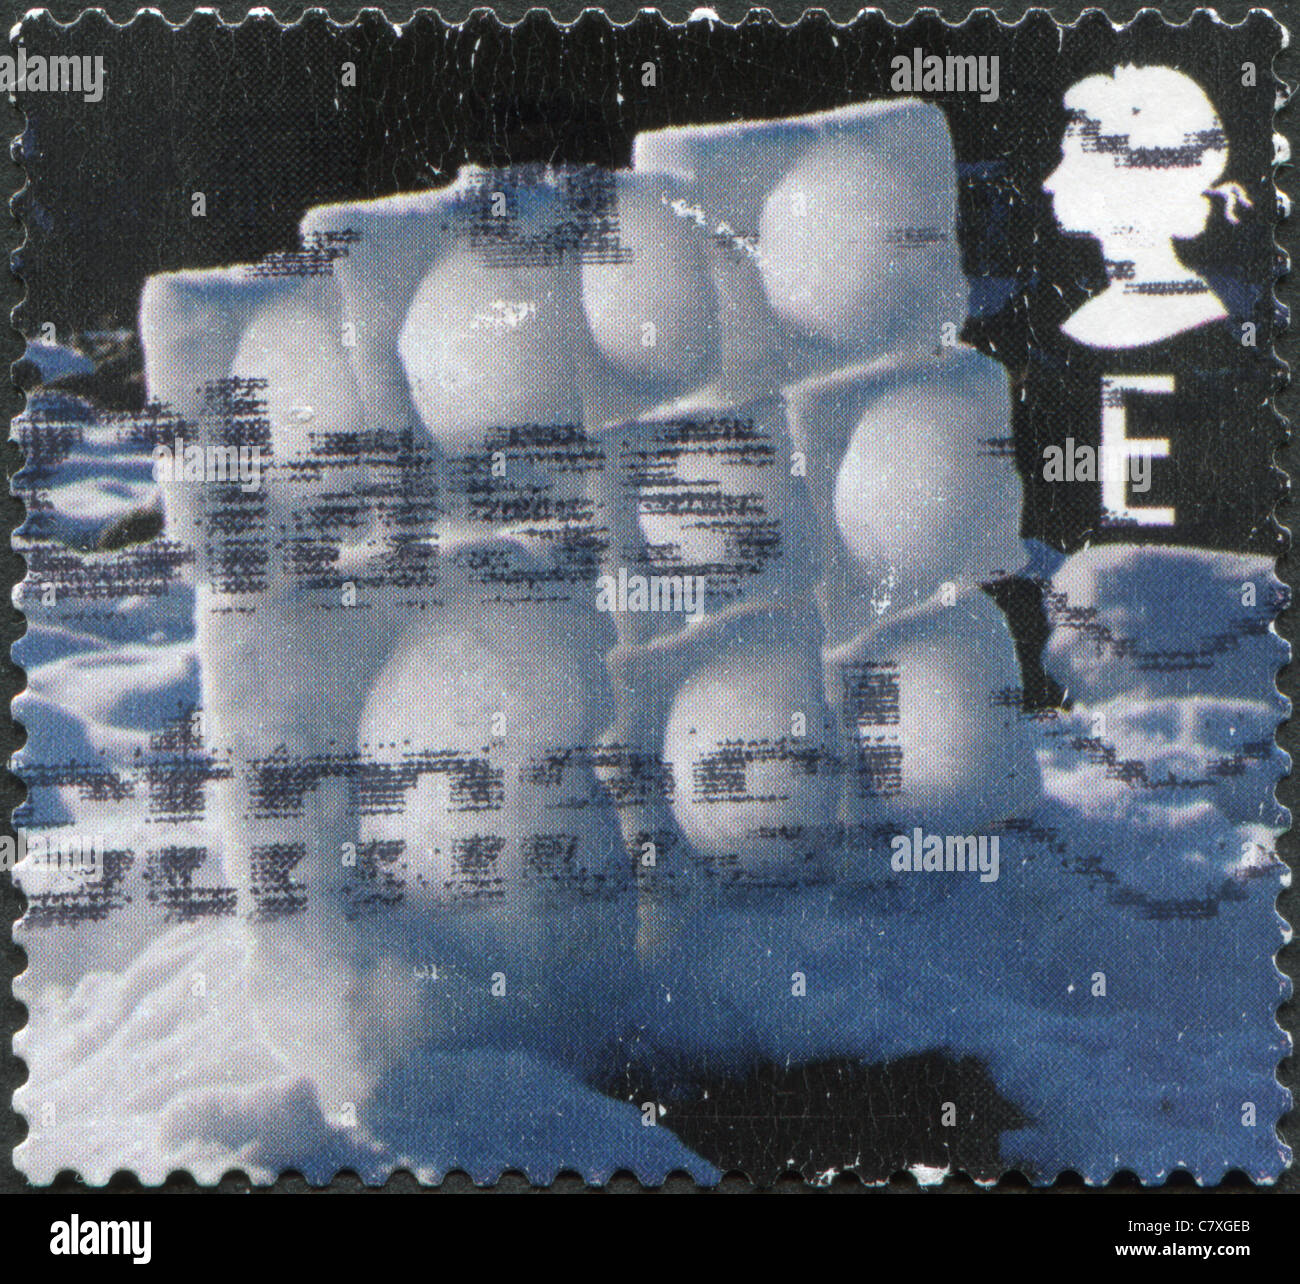 UK - 2003: A stamp printed in England, depicts shows the Ice and snow sculptures by Andy Goldsworthy, Wall of Frozen Snow Stock Photo